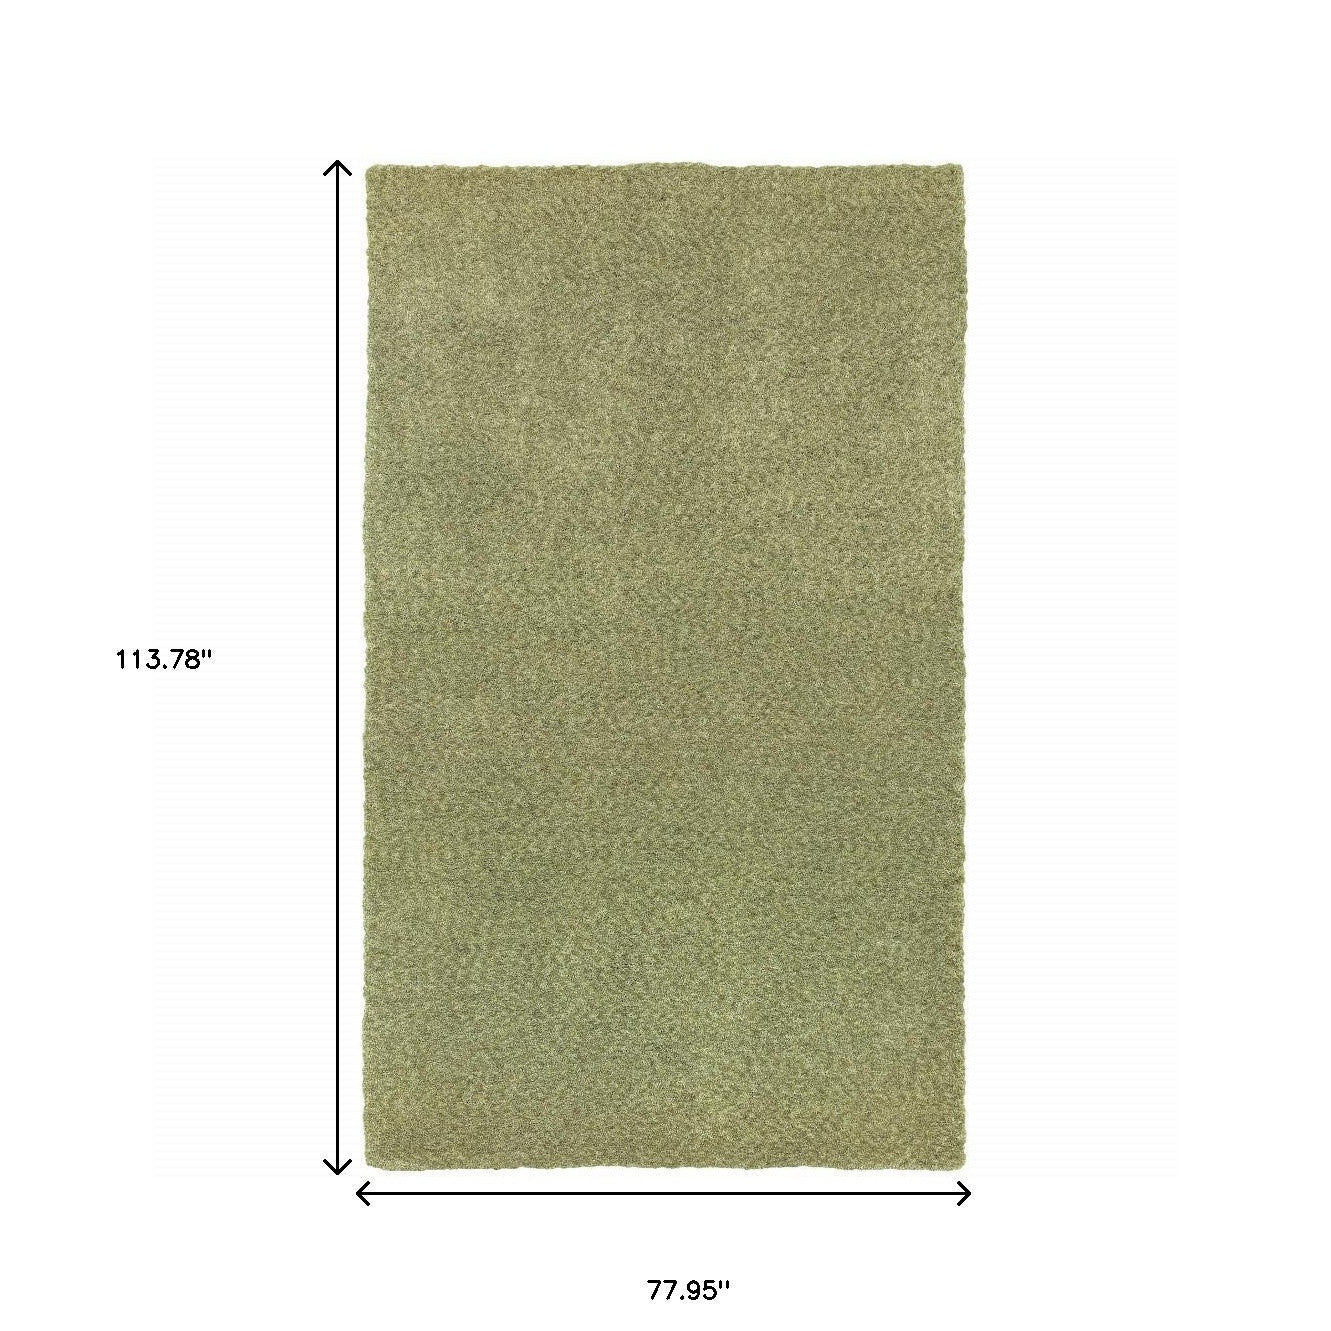 6' X 9' Olive Green Shag Tufted Handmade Stain Resistant Area Rug